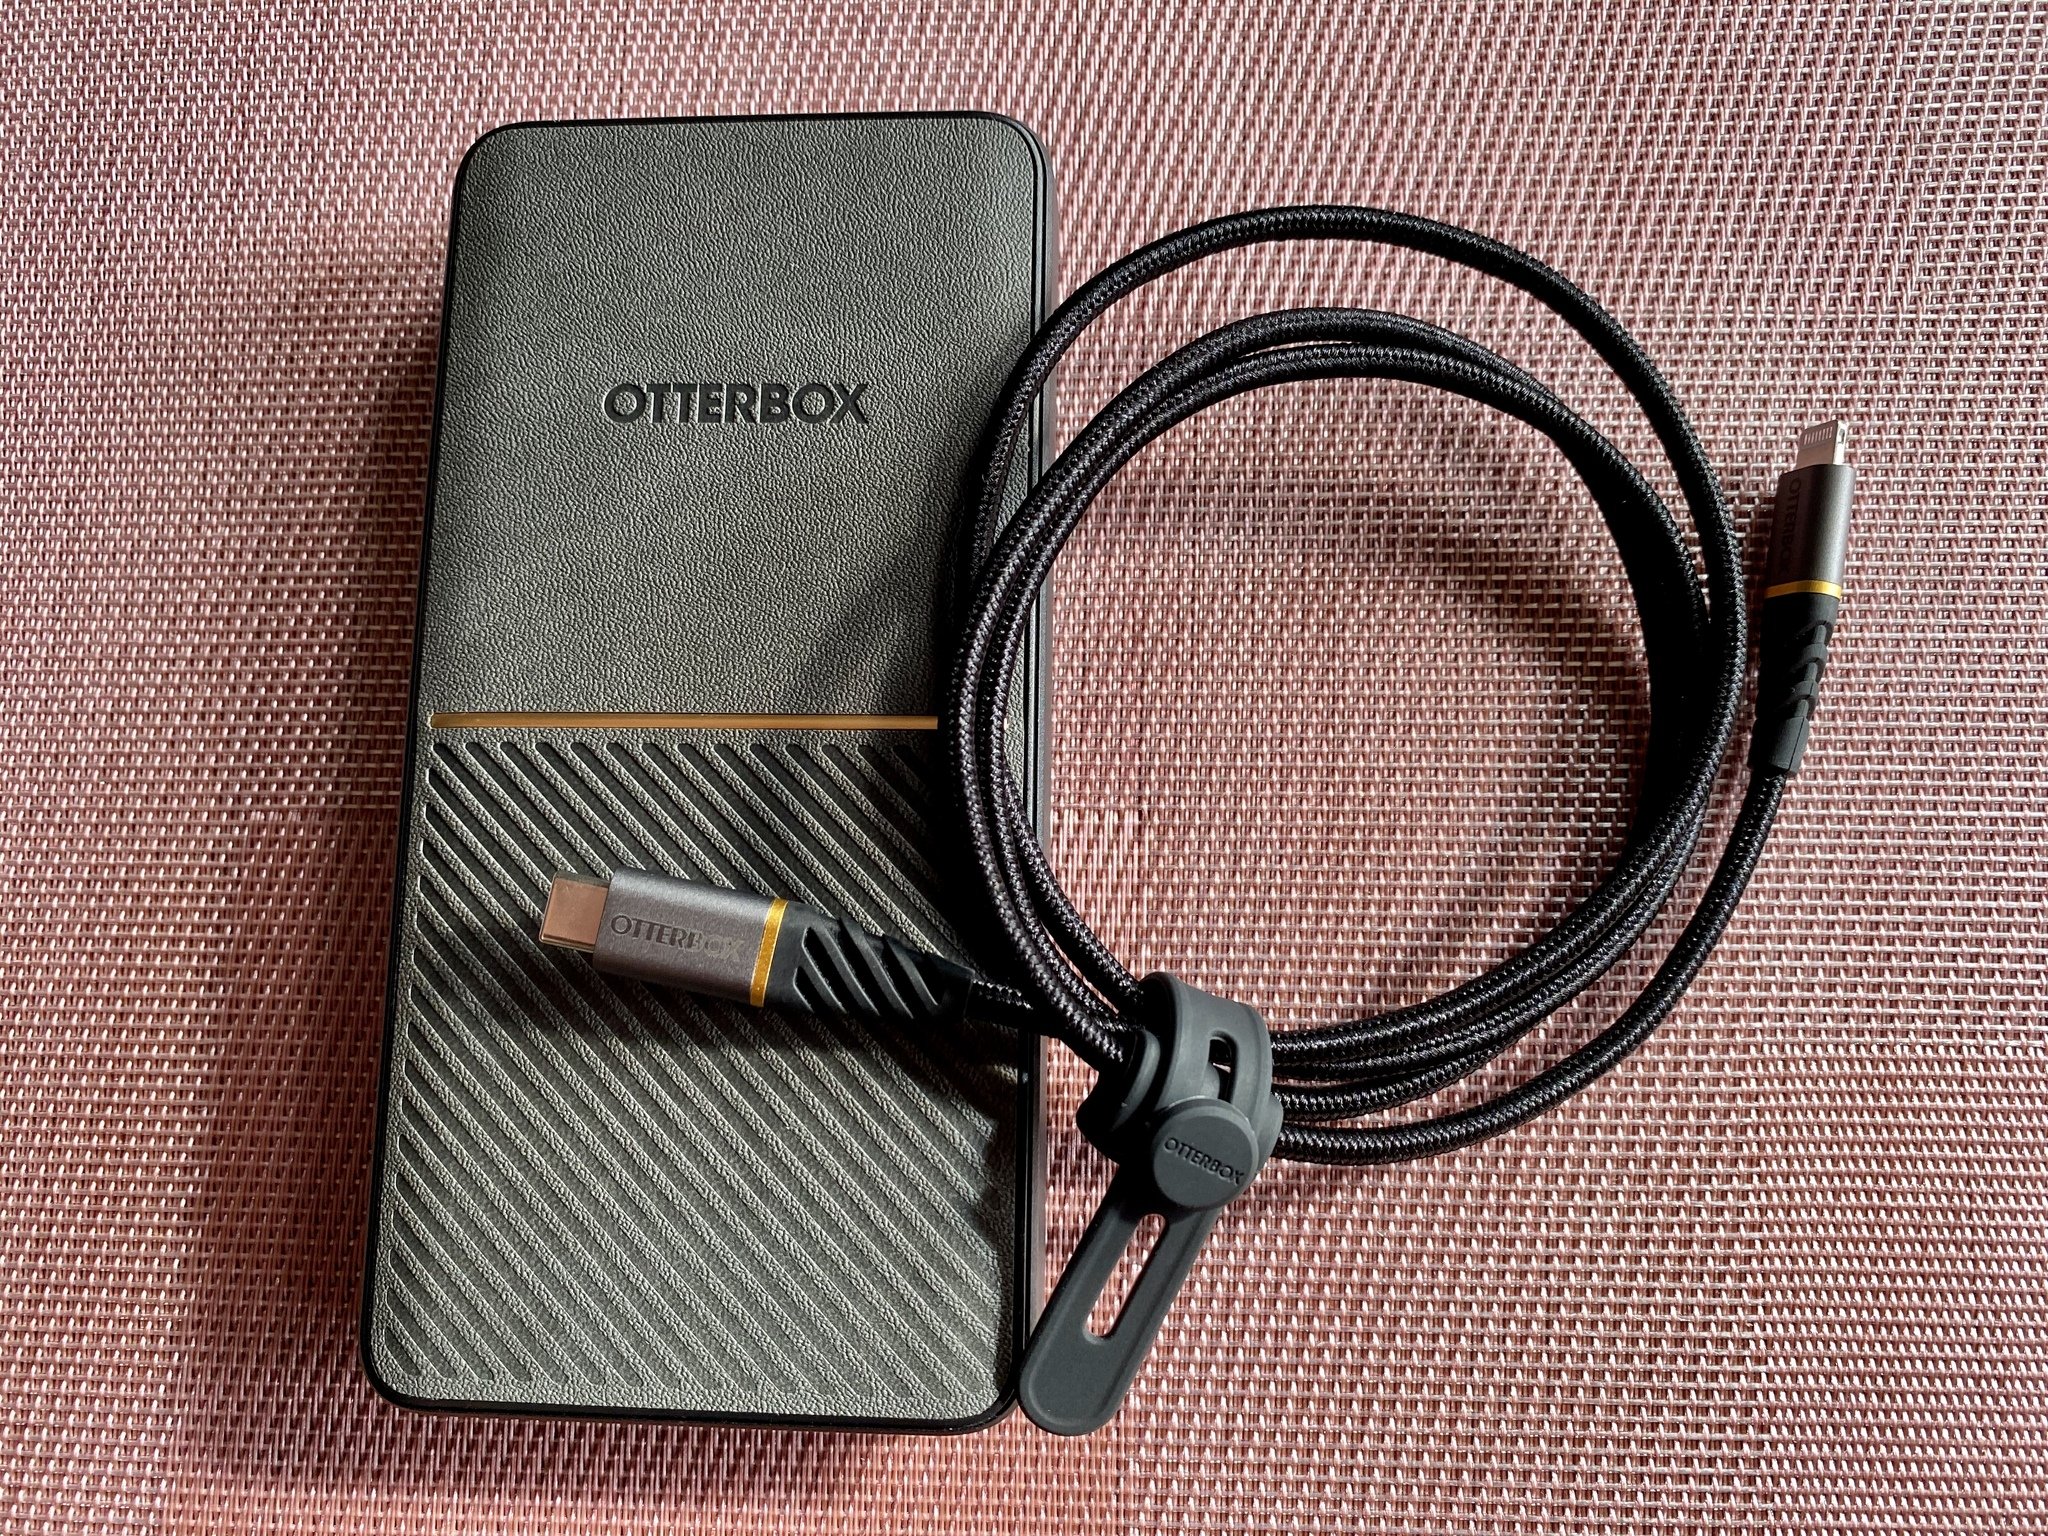 Otterbox Fast Charger Power Bank